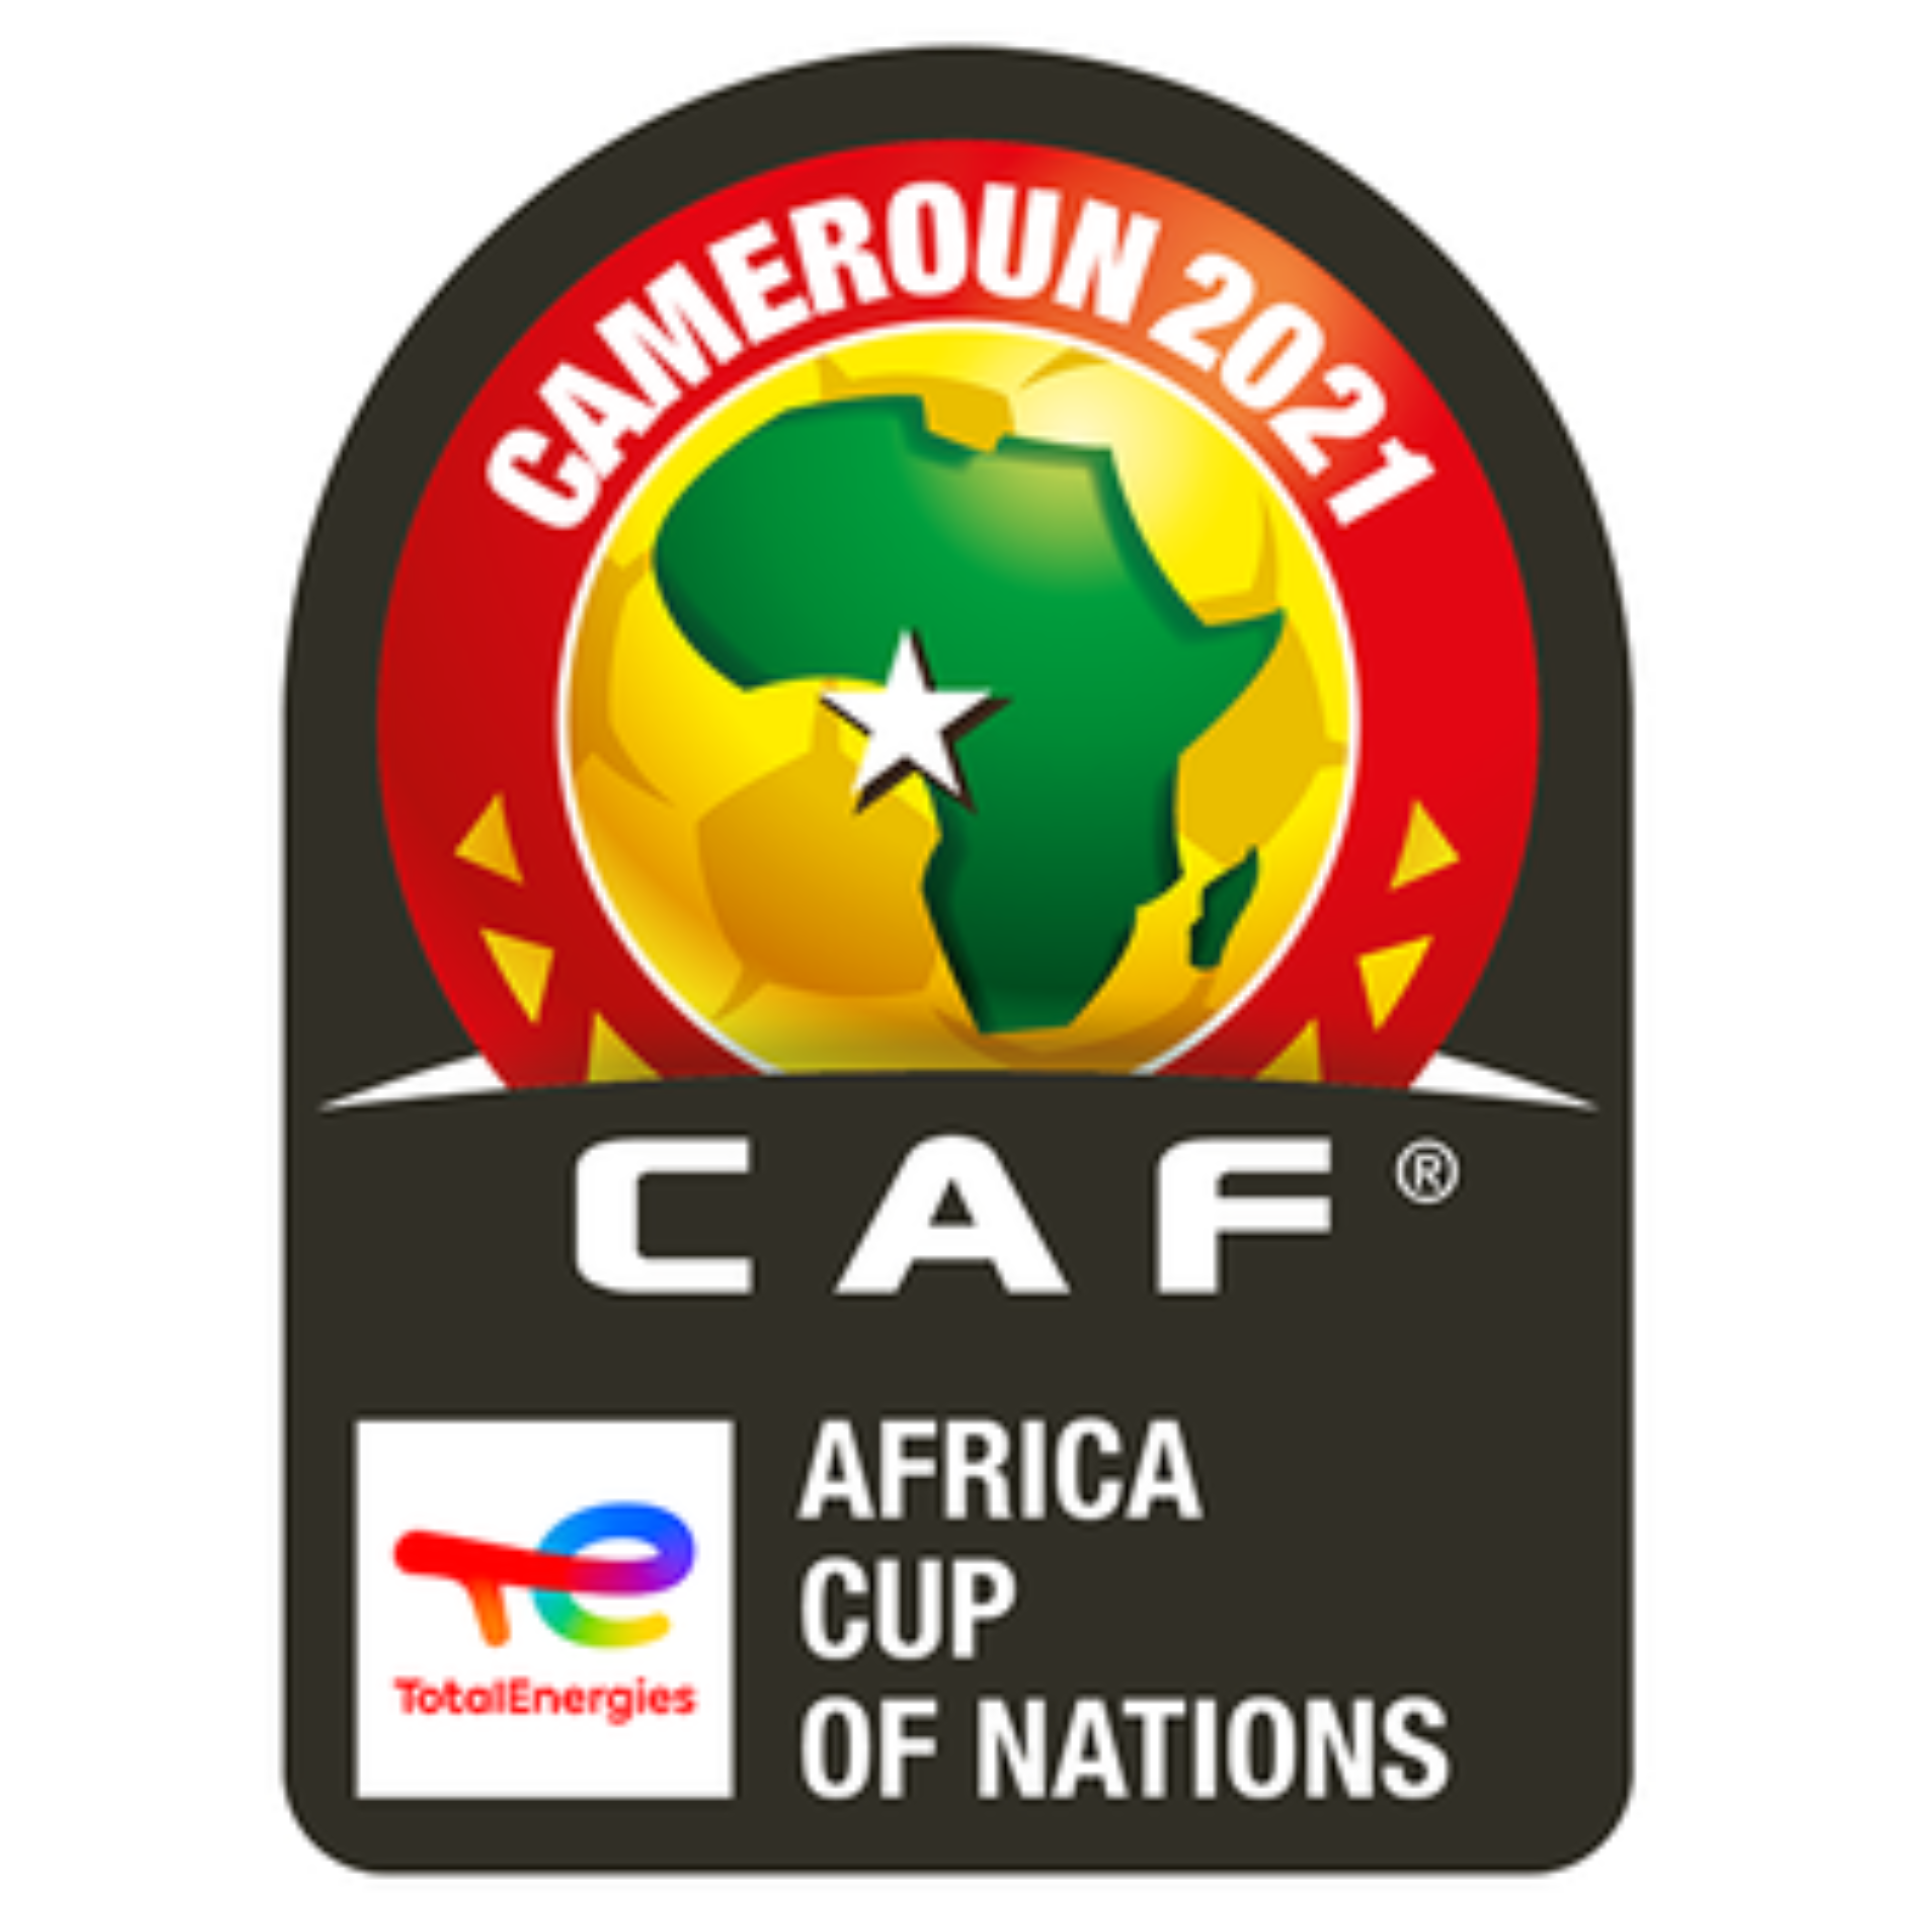 2021 Africa Cup of Nations logo